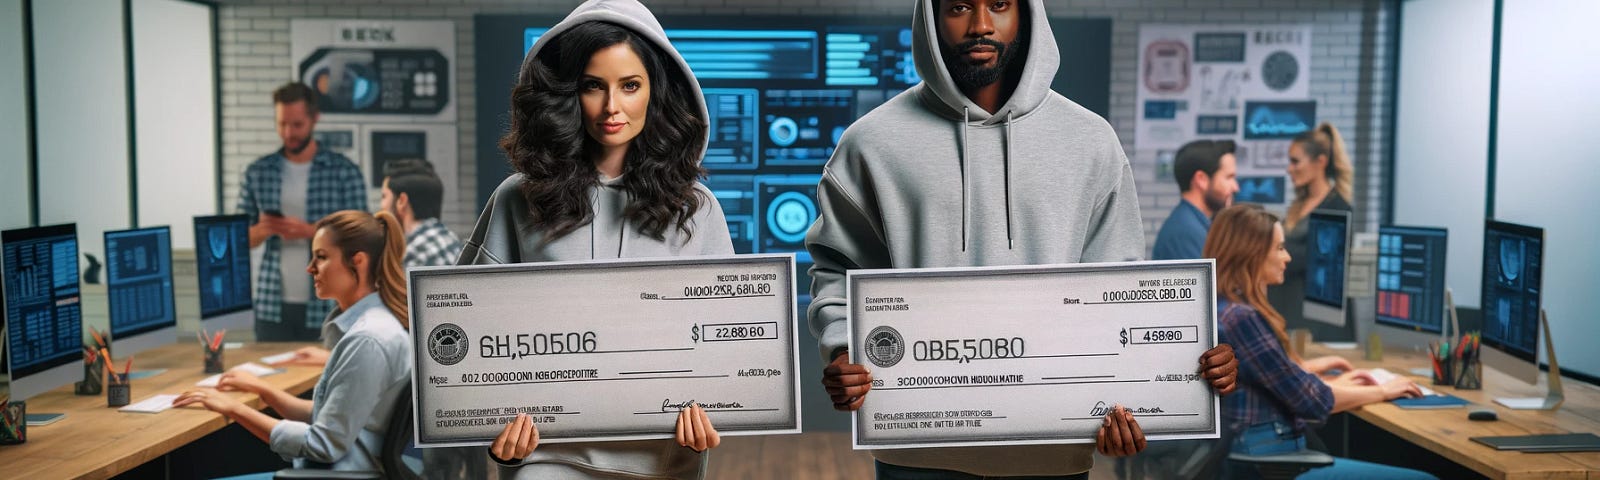 An image that symbolically represented the gender pay gap in the tech industry, In this version, the woman of Hispanic descent and the man of Black descent are dressed in casual tech attire, specifically hoodies and jeans. They are still holding large, symbolic paychecks that show a clear disparity in amounts, with the woman’s paycheck being smaller. The setting is a modern tech office, with elements like computers, digital screens, and colleagues